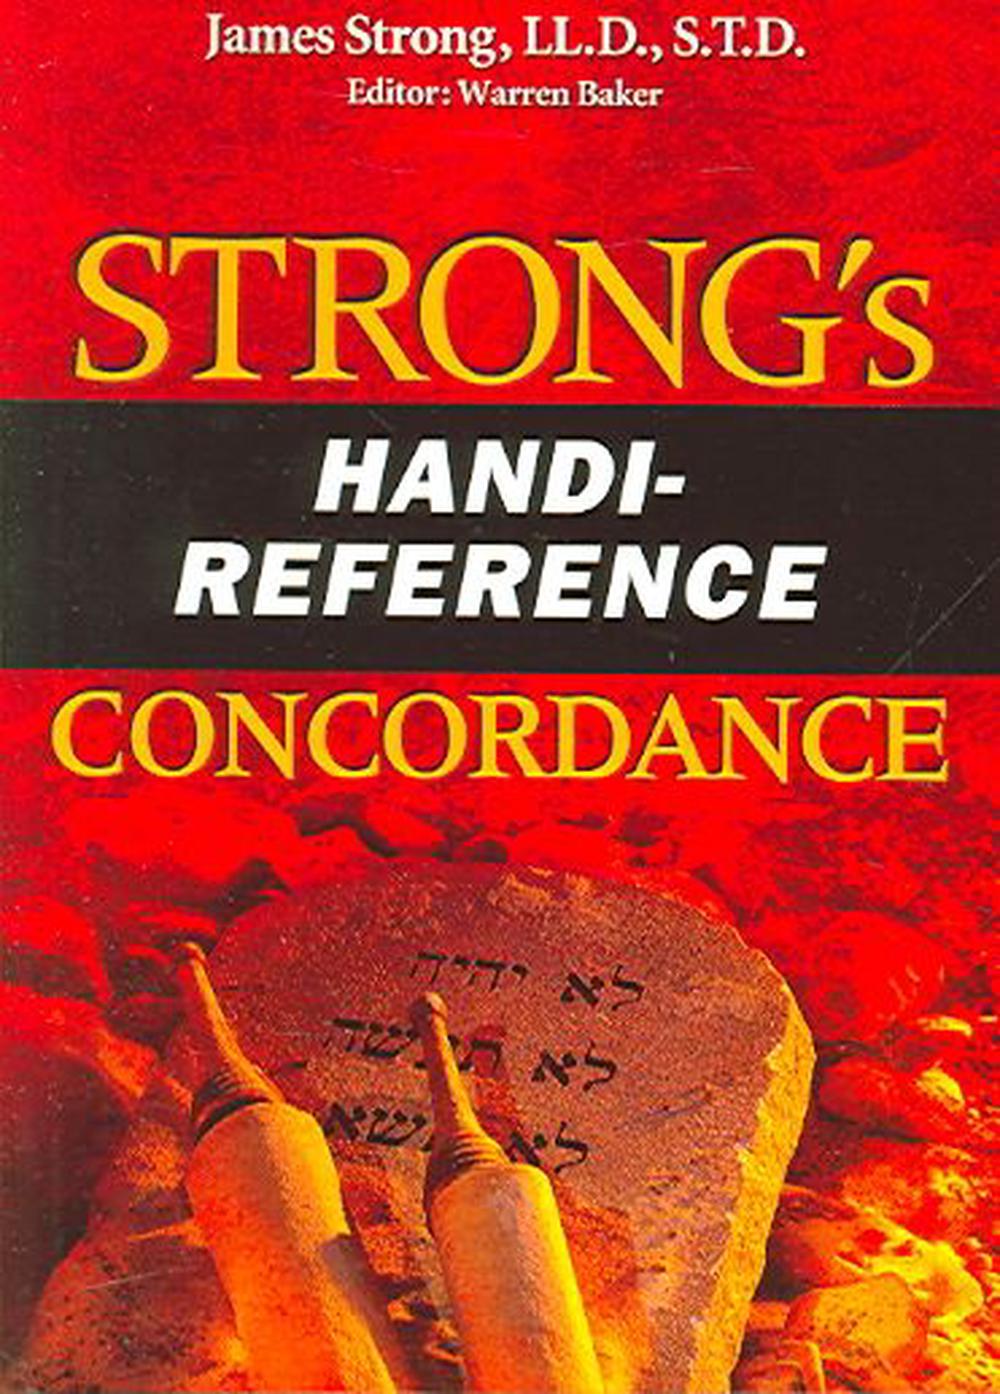 Strongs Handi Reference Concordance